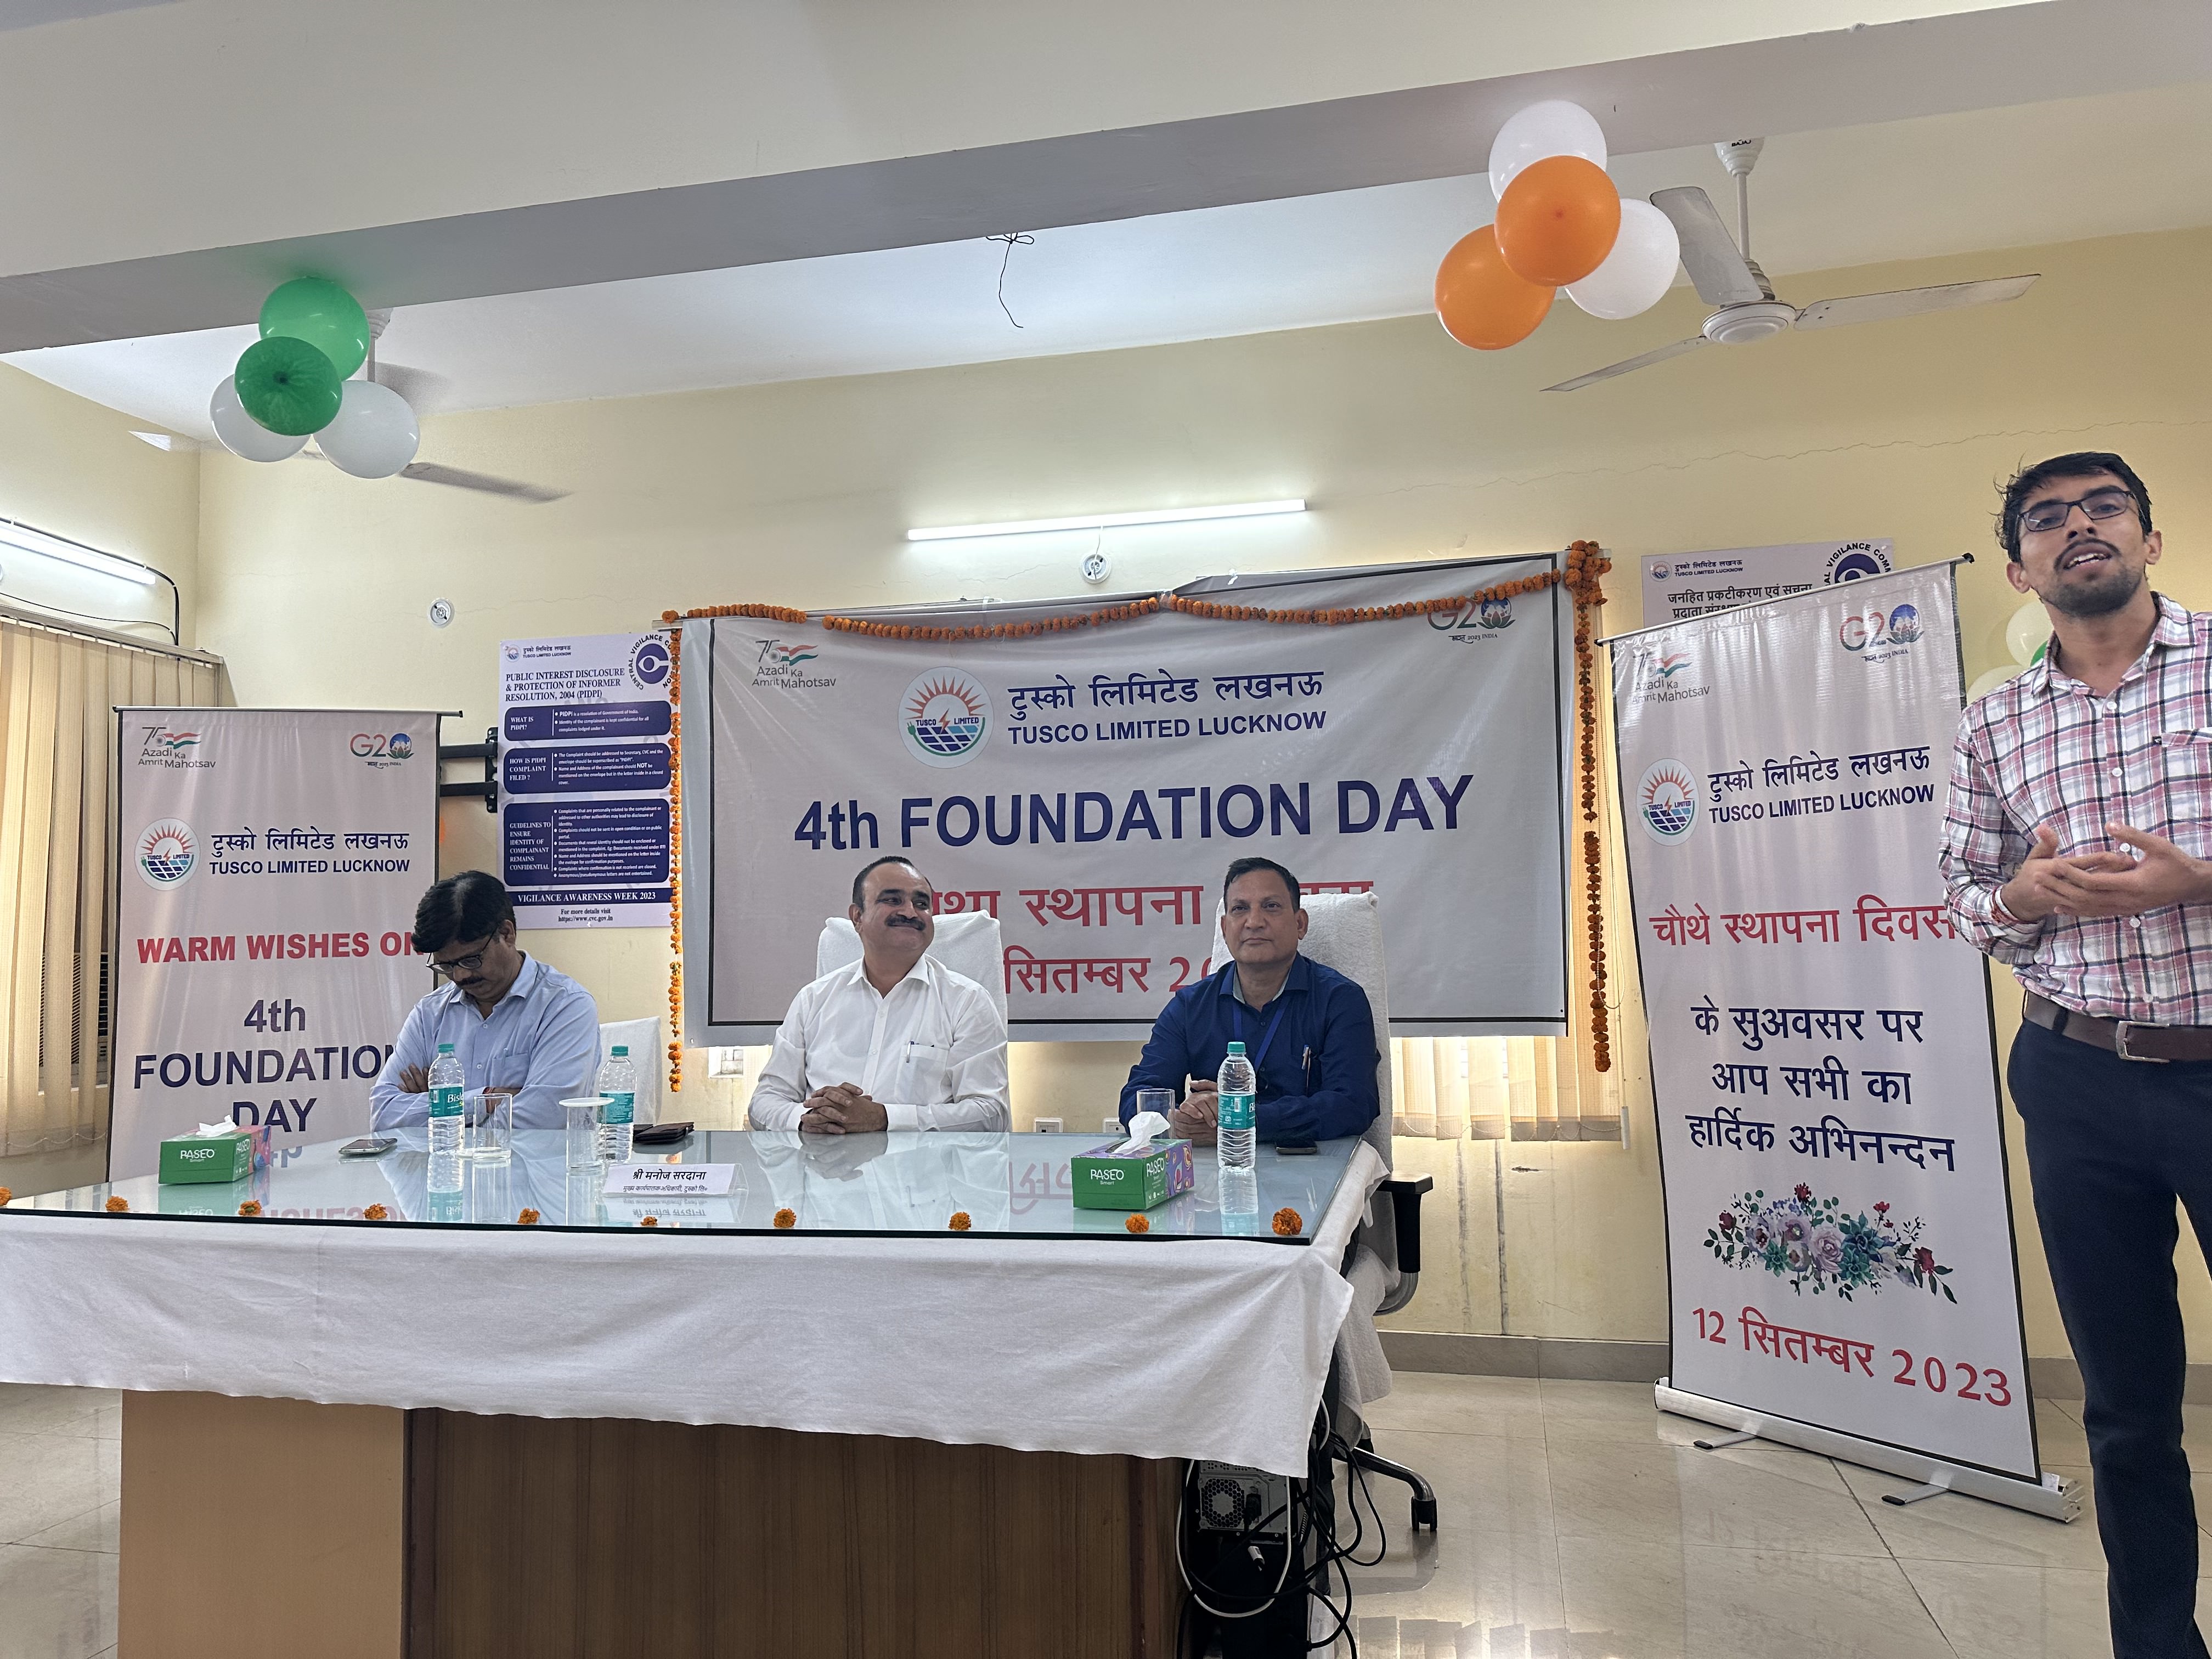 Celebration of 4th Foundation Day of TUSCO Limited